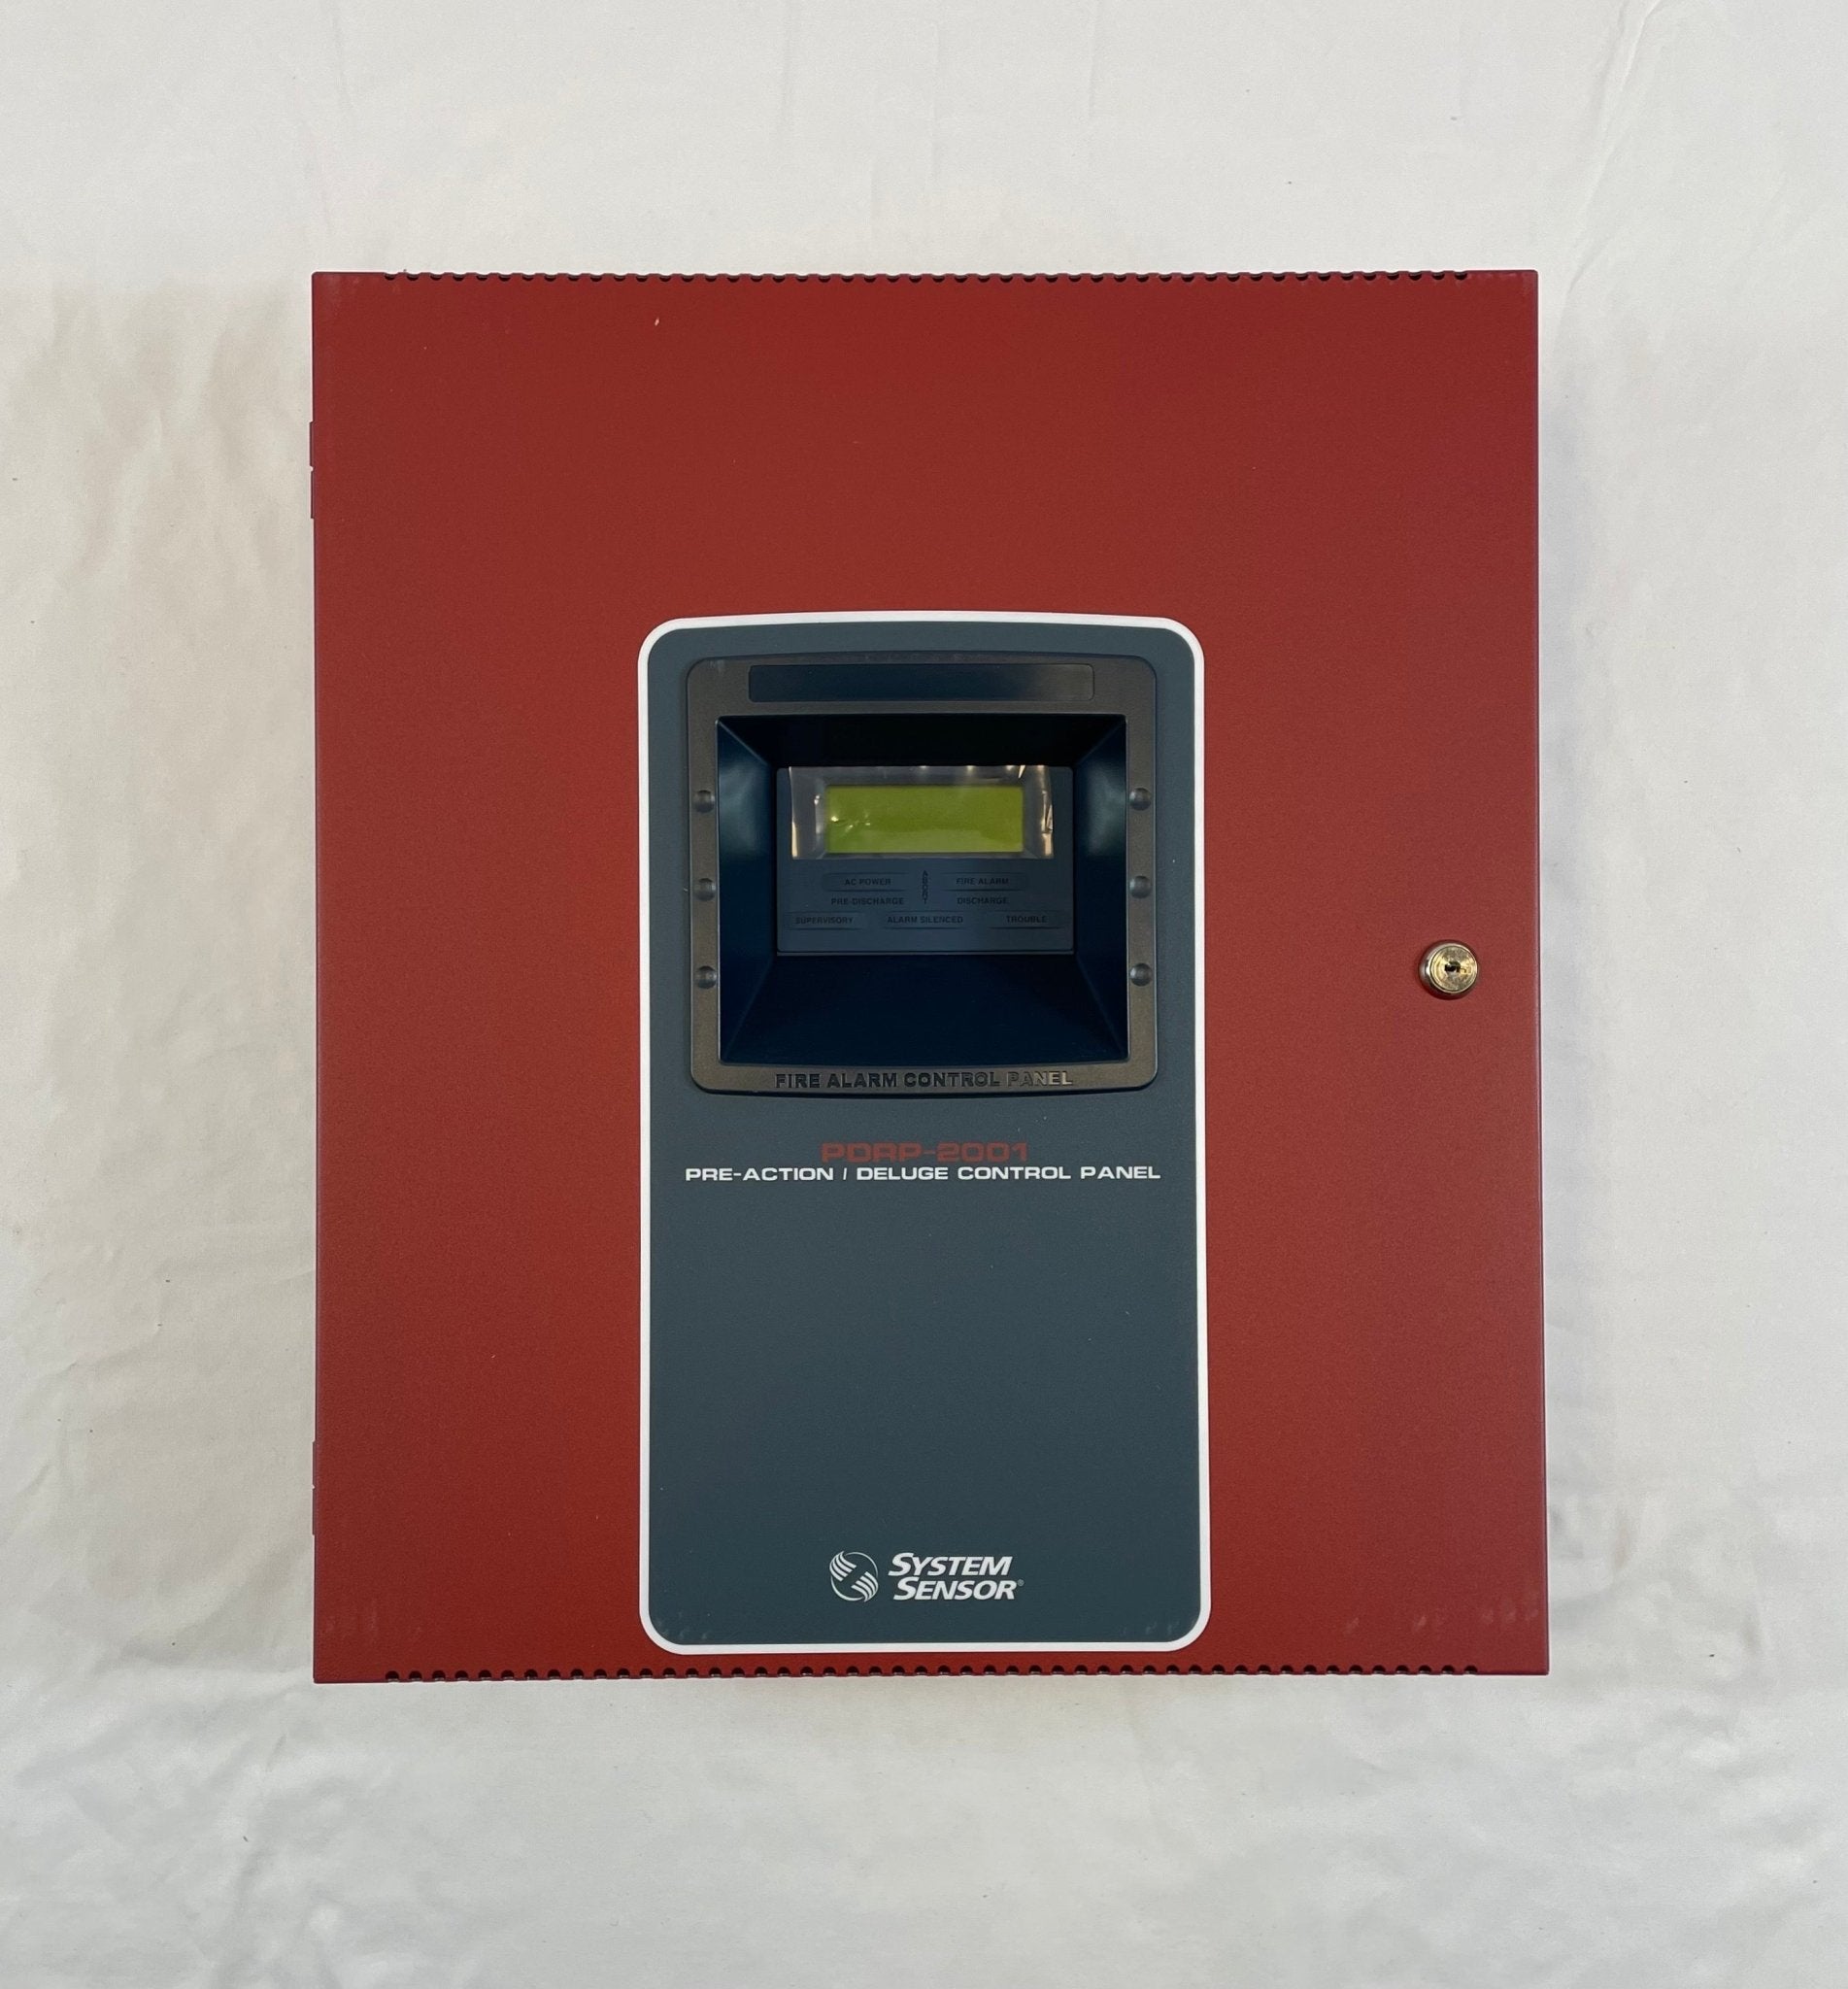 System Sensor PDRP-2001 - The Fire Alarm Supplier